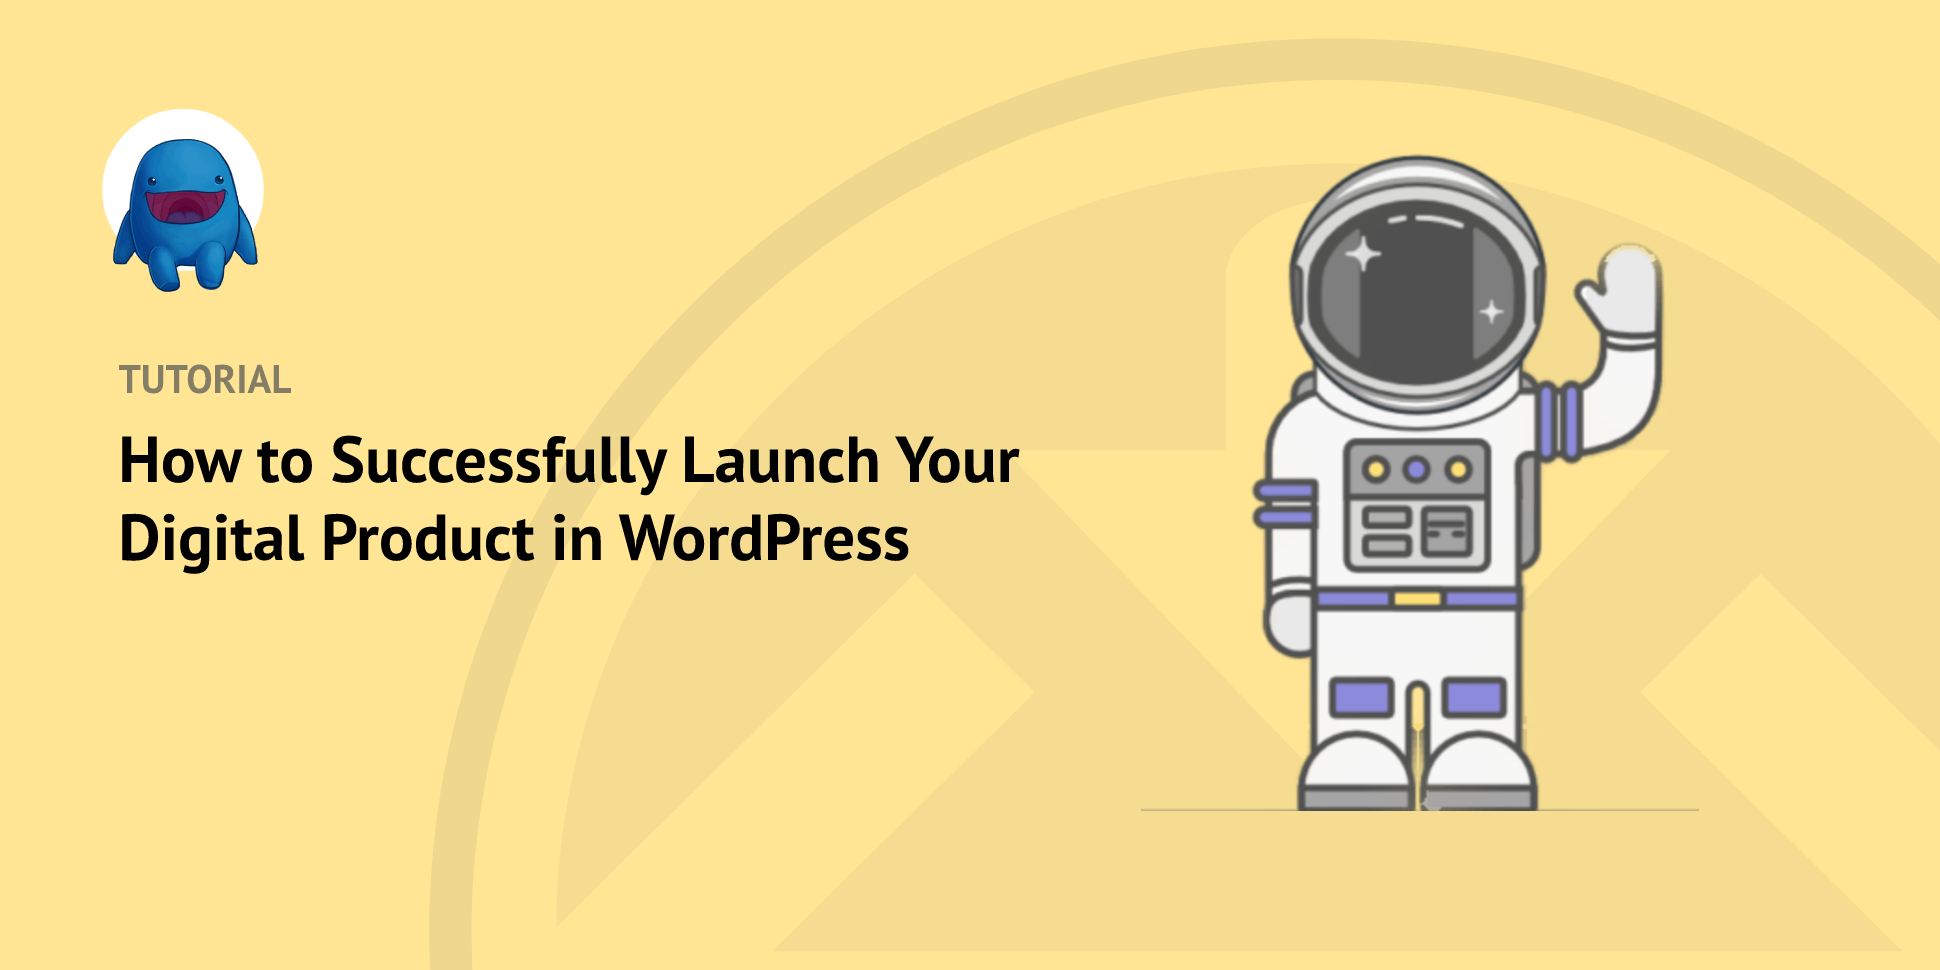 How to Successfully Launch Your Digital Product in WordPress